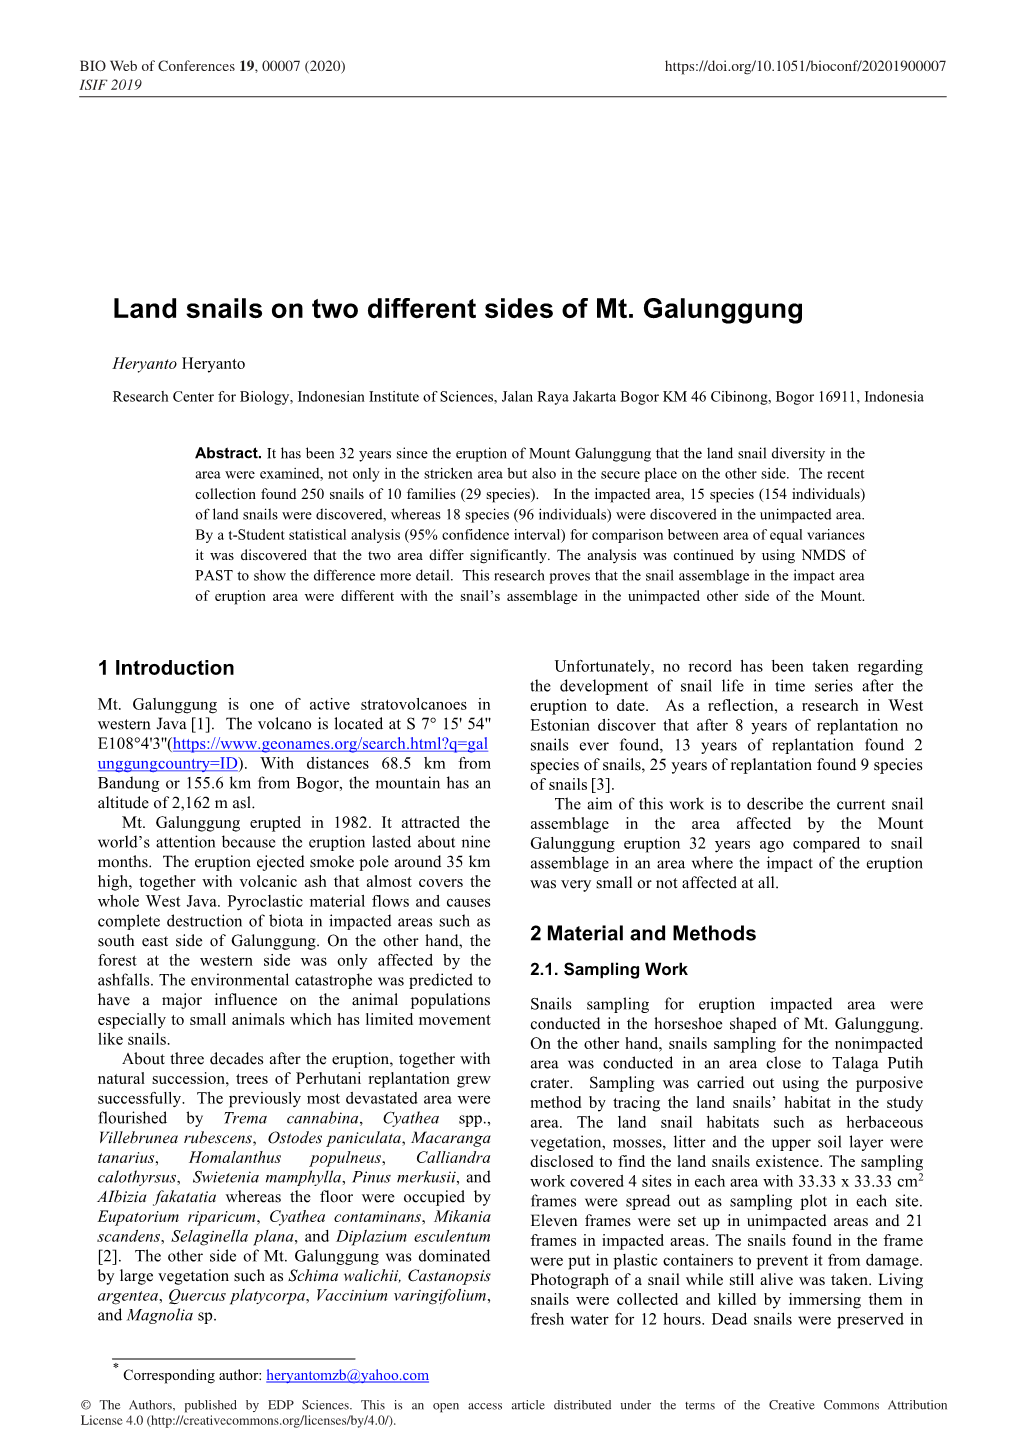 Land Snails on Two Different Sides of Mt. Galunggung